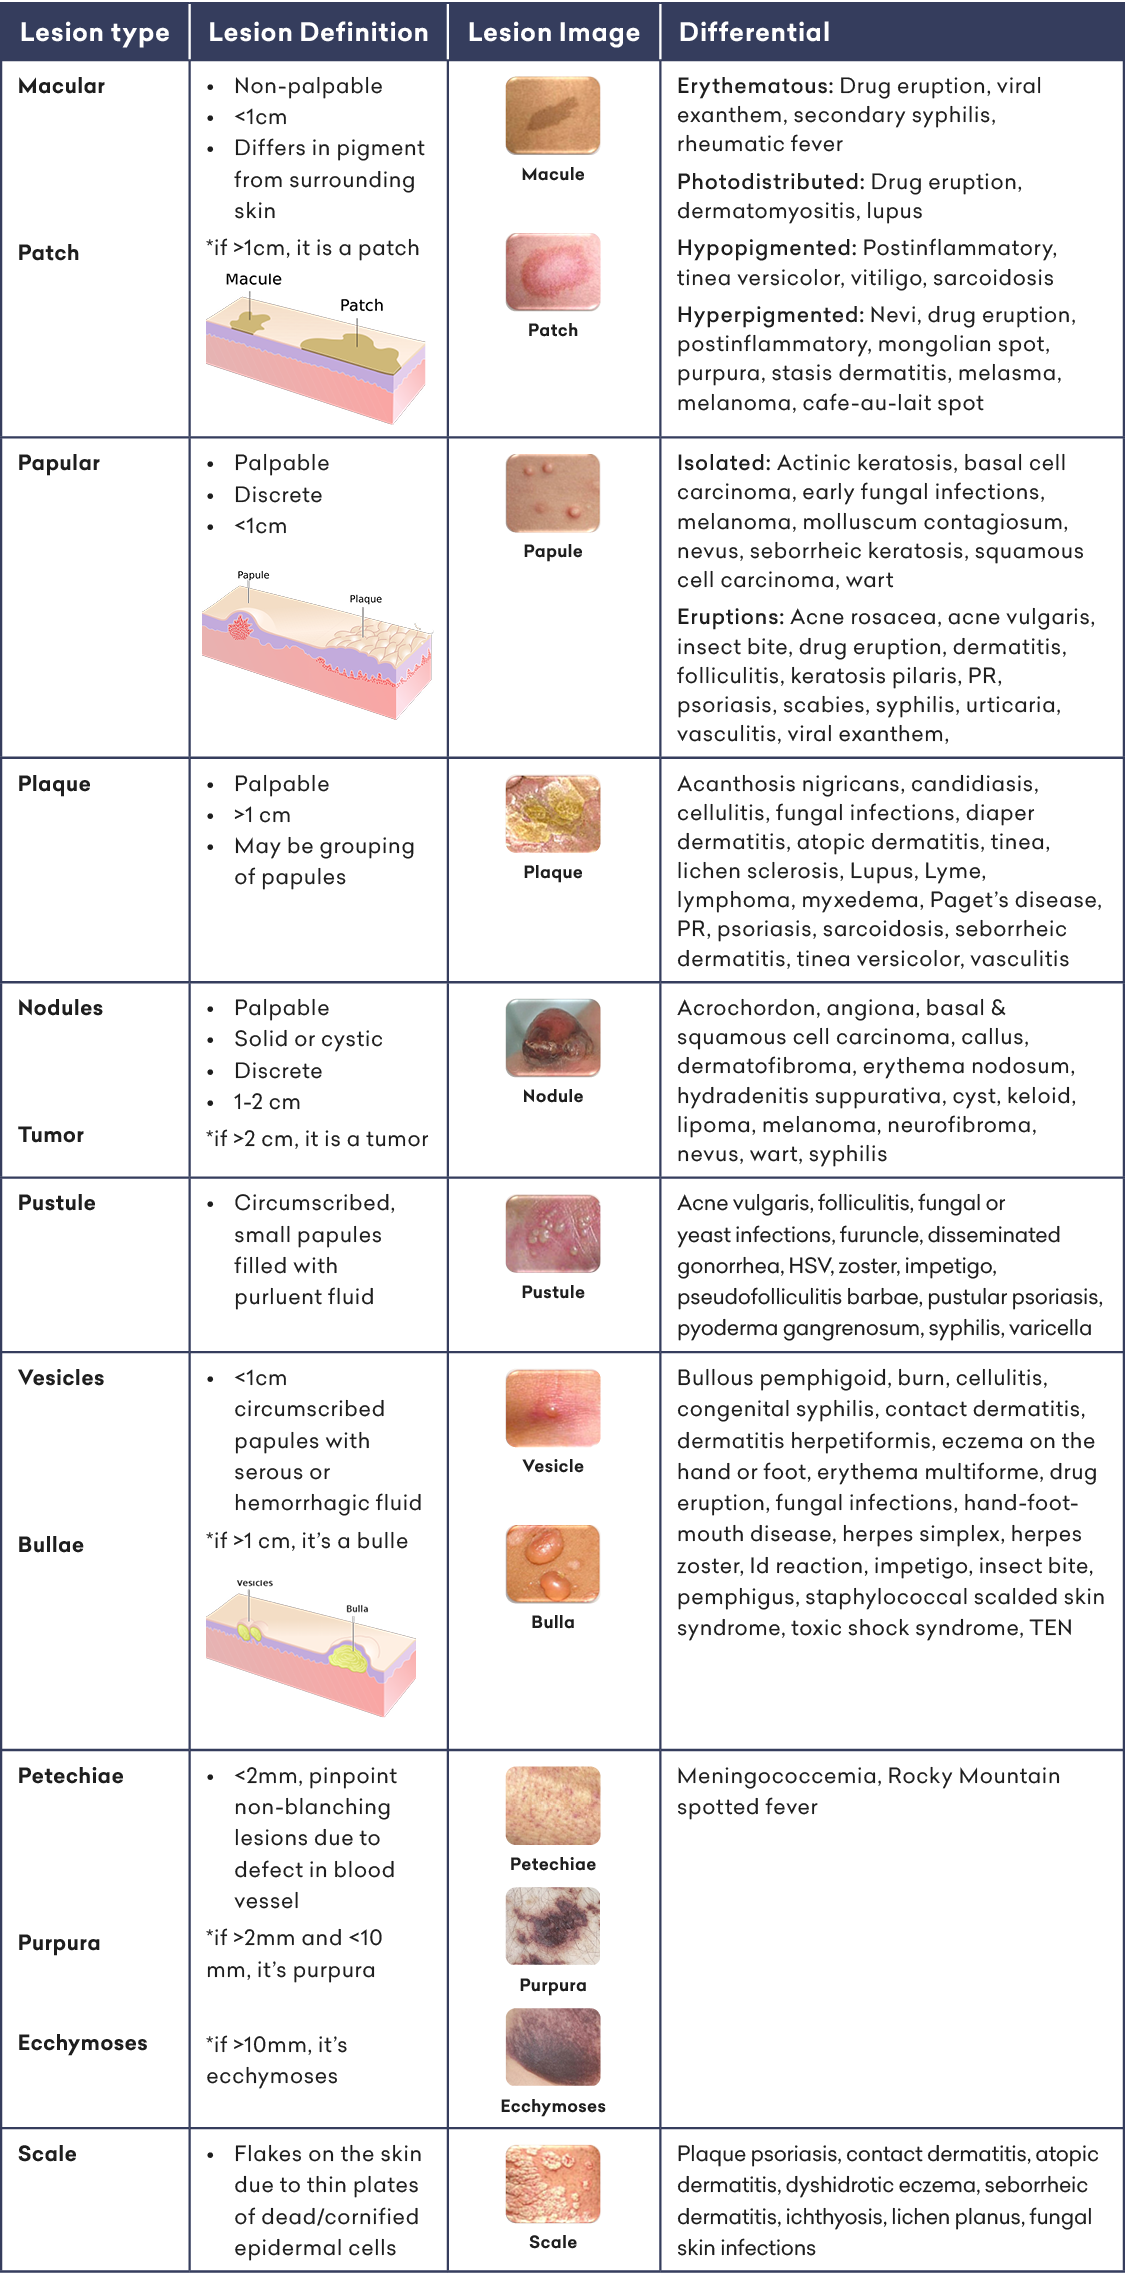 Dermatology Dictionary of Lesions